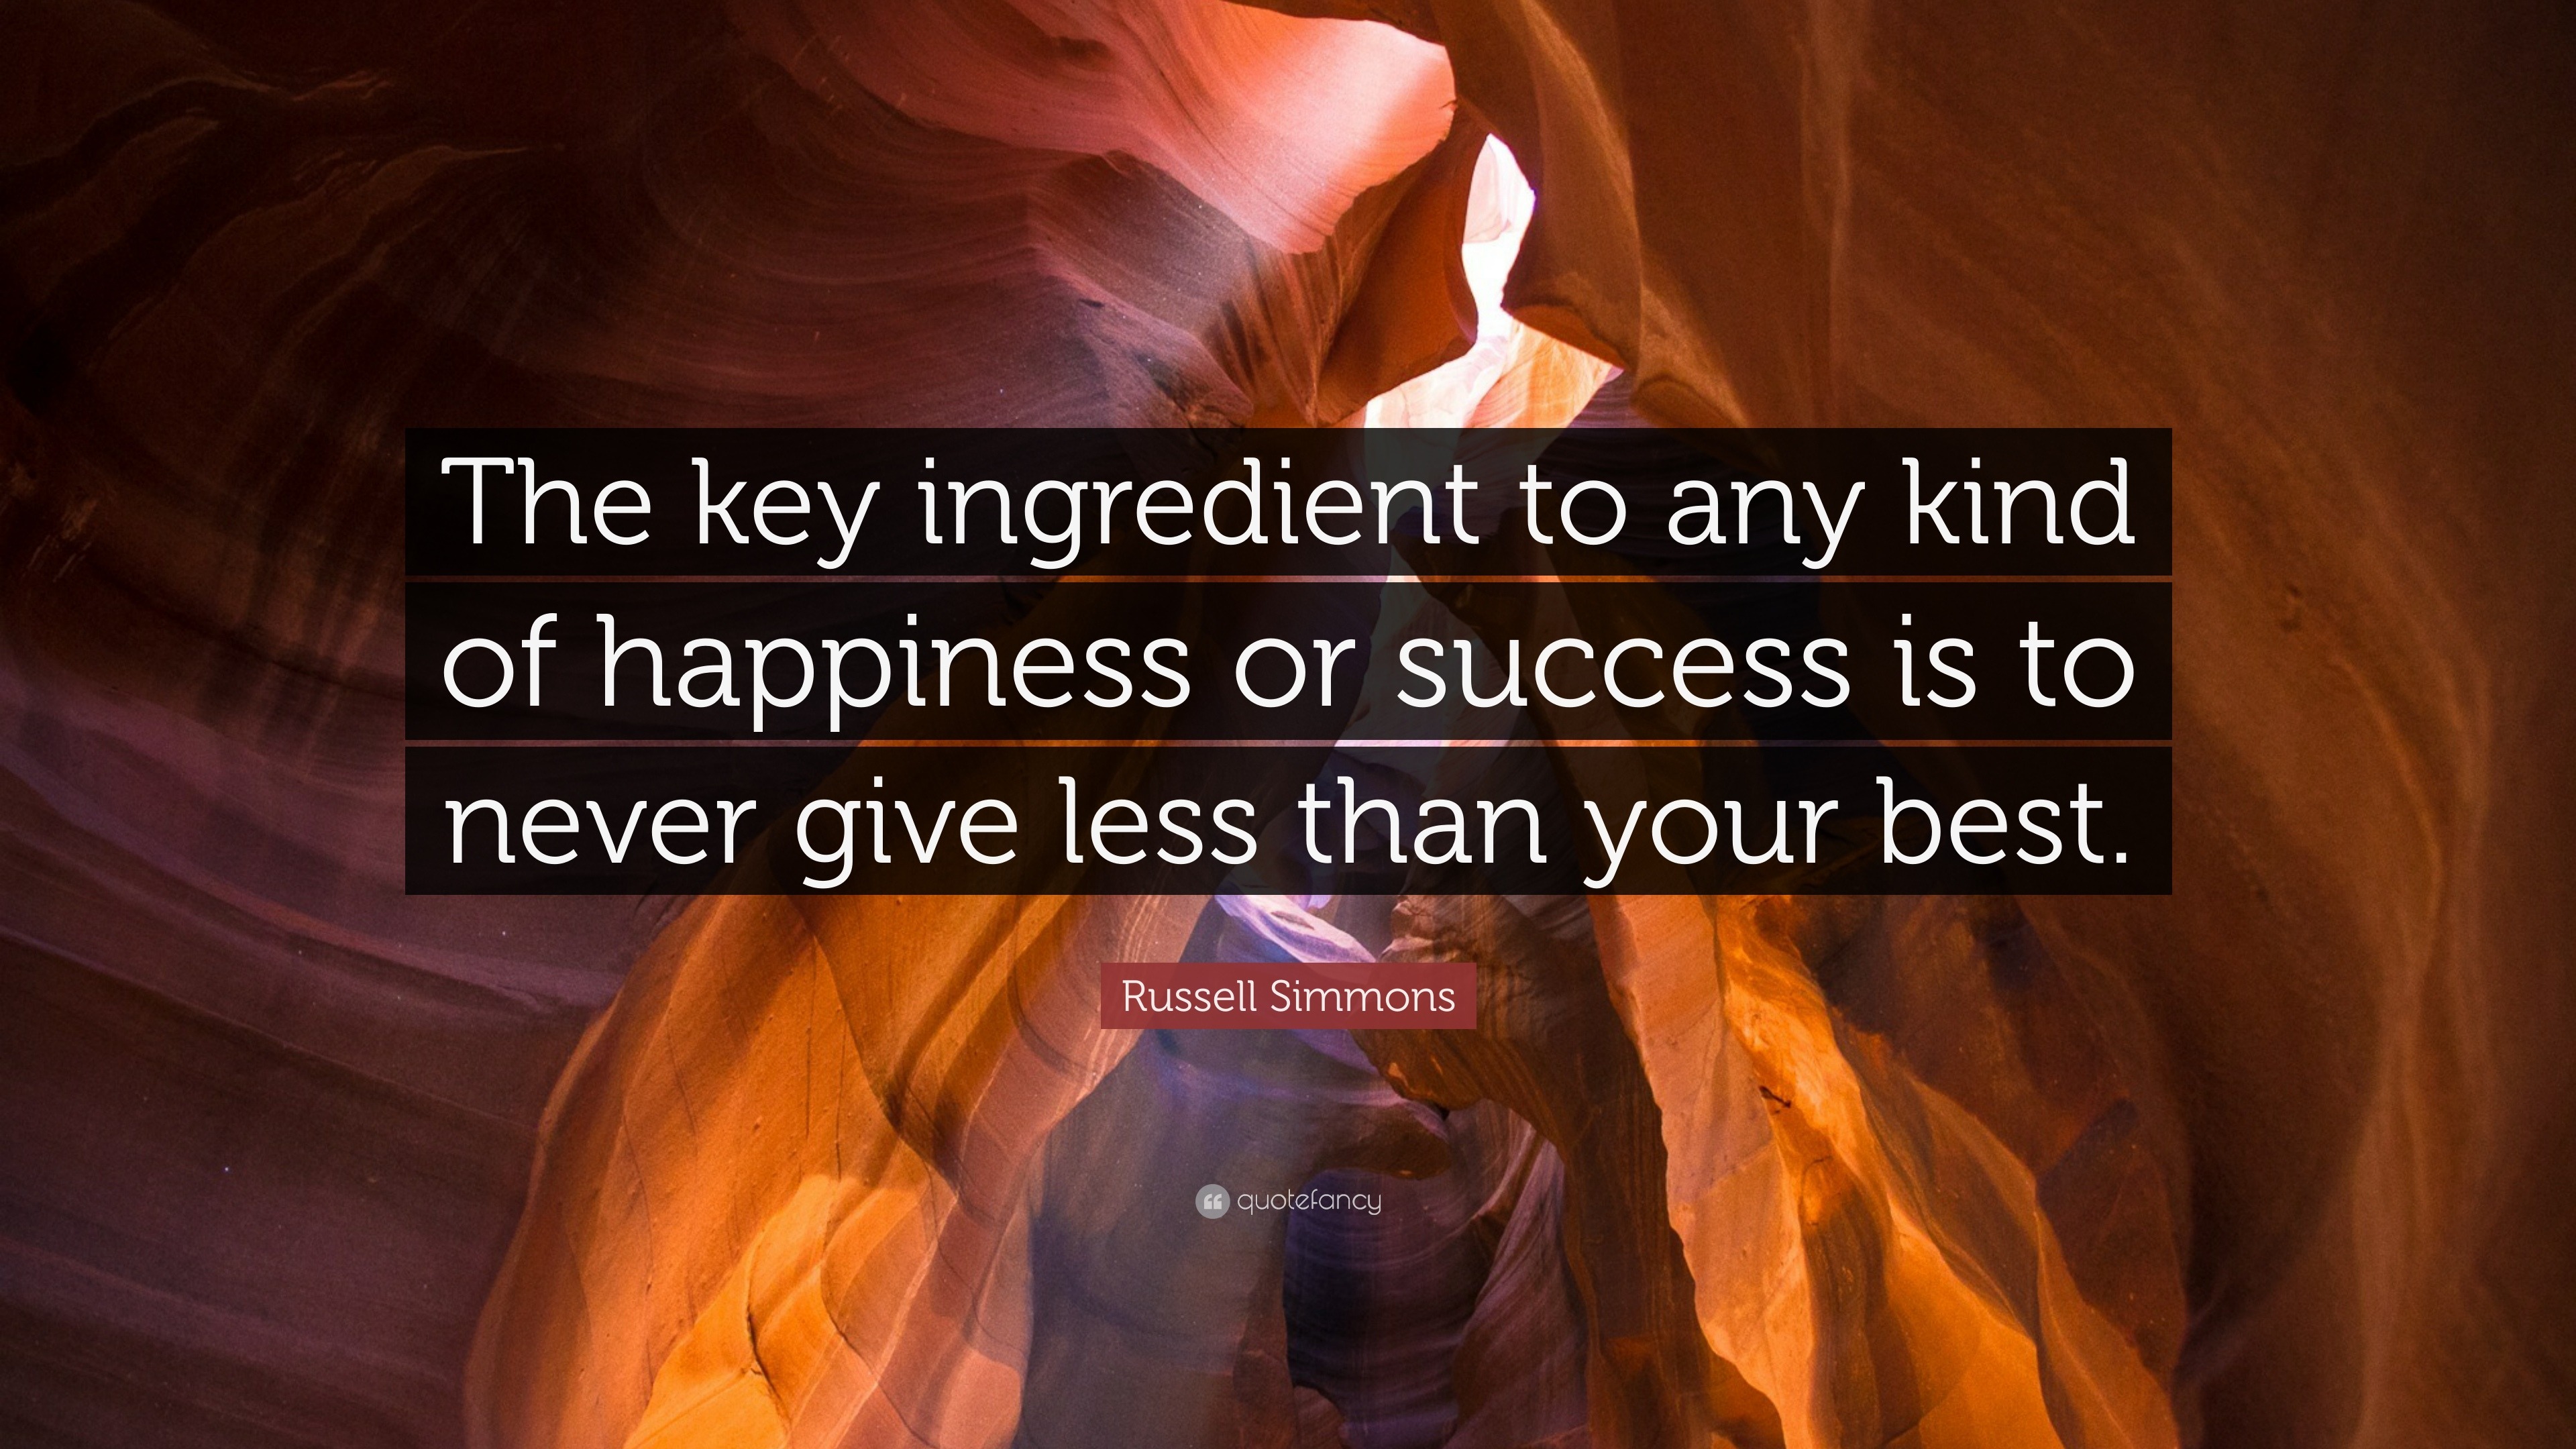 Russell Simmons Quote: “The key ingredient to any kind of happiness or ...